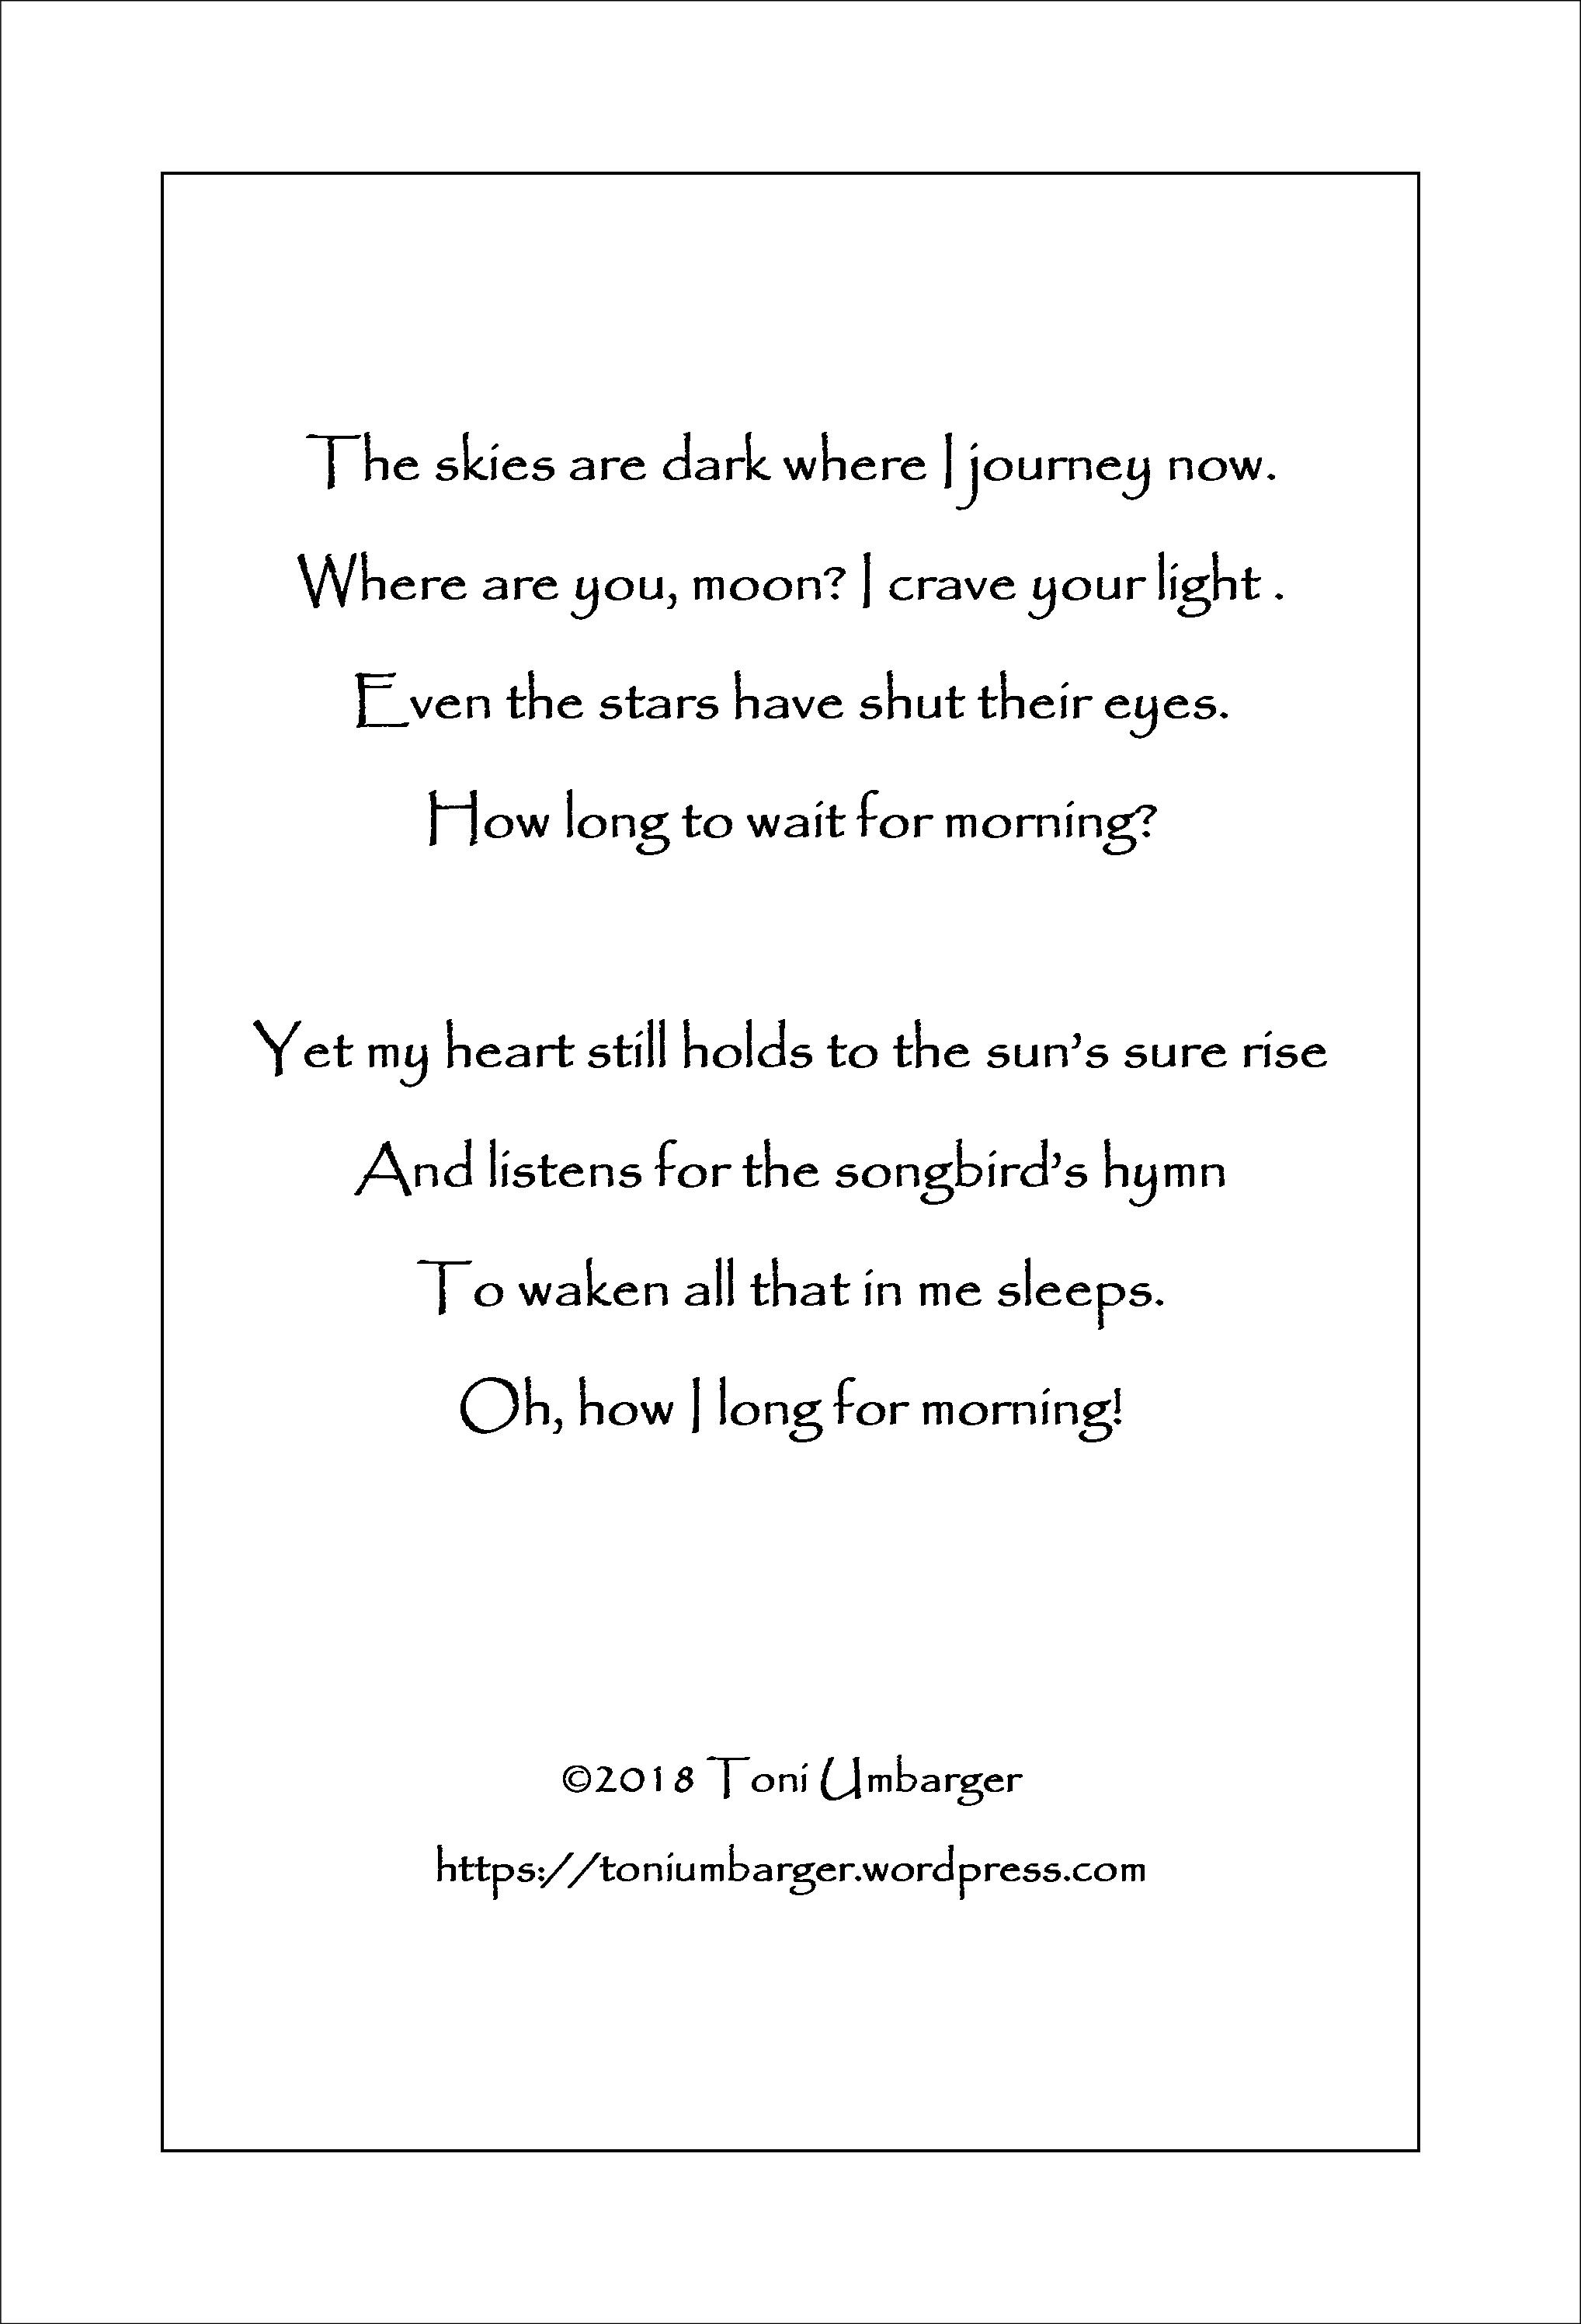 Toni Umbarger | Thoughtseeds | Morning | #poetry #longing #suffering #morning #hope #thoughtseeds